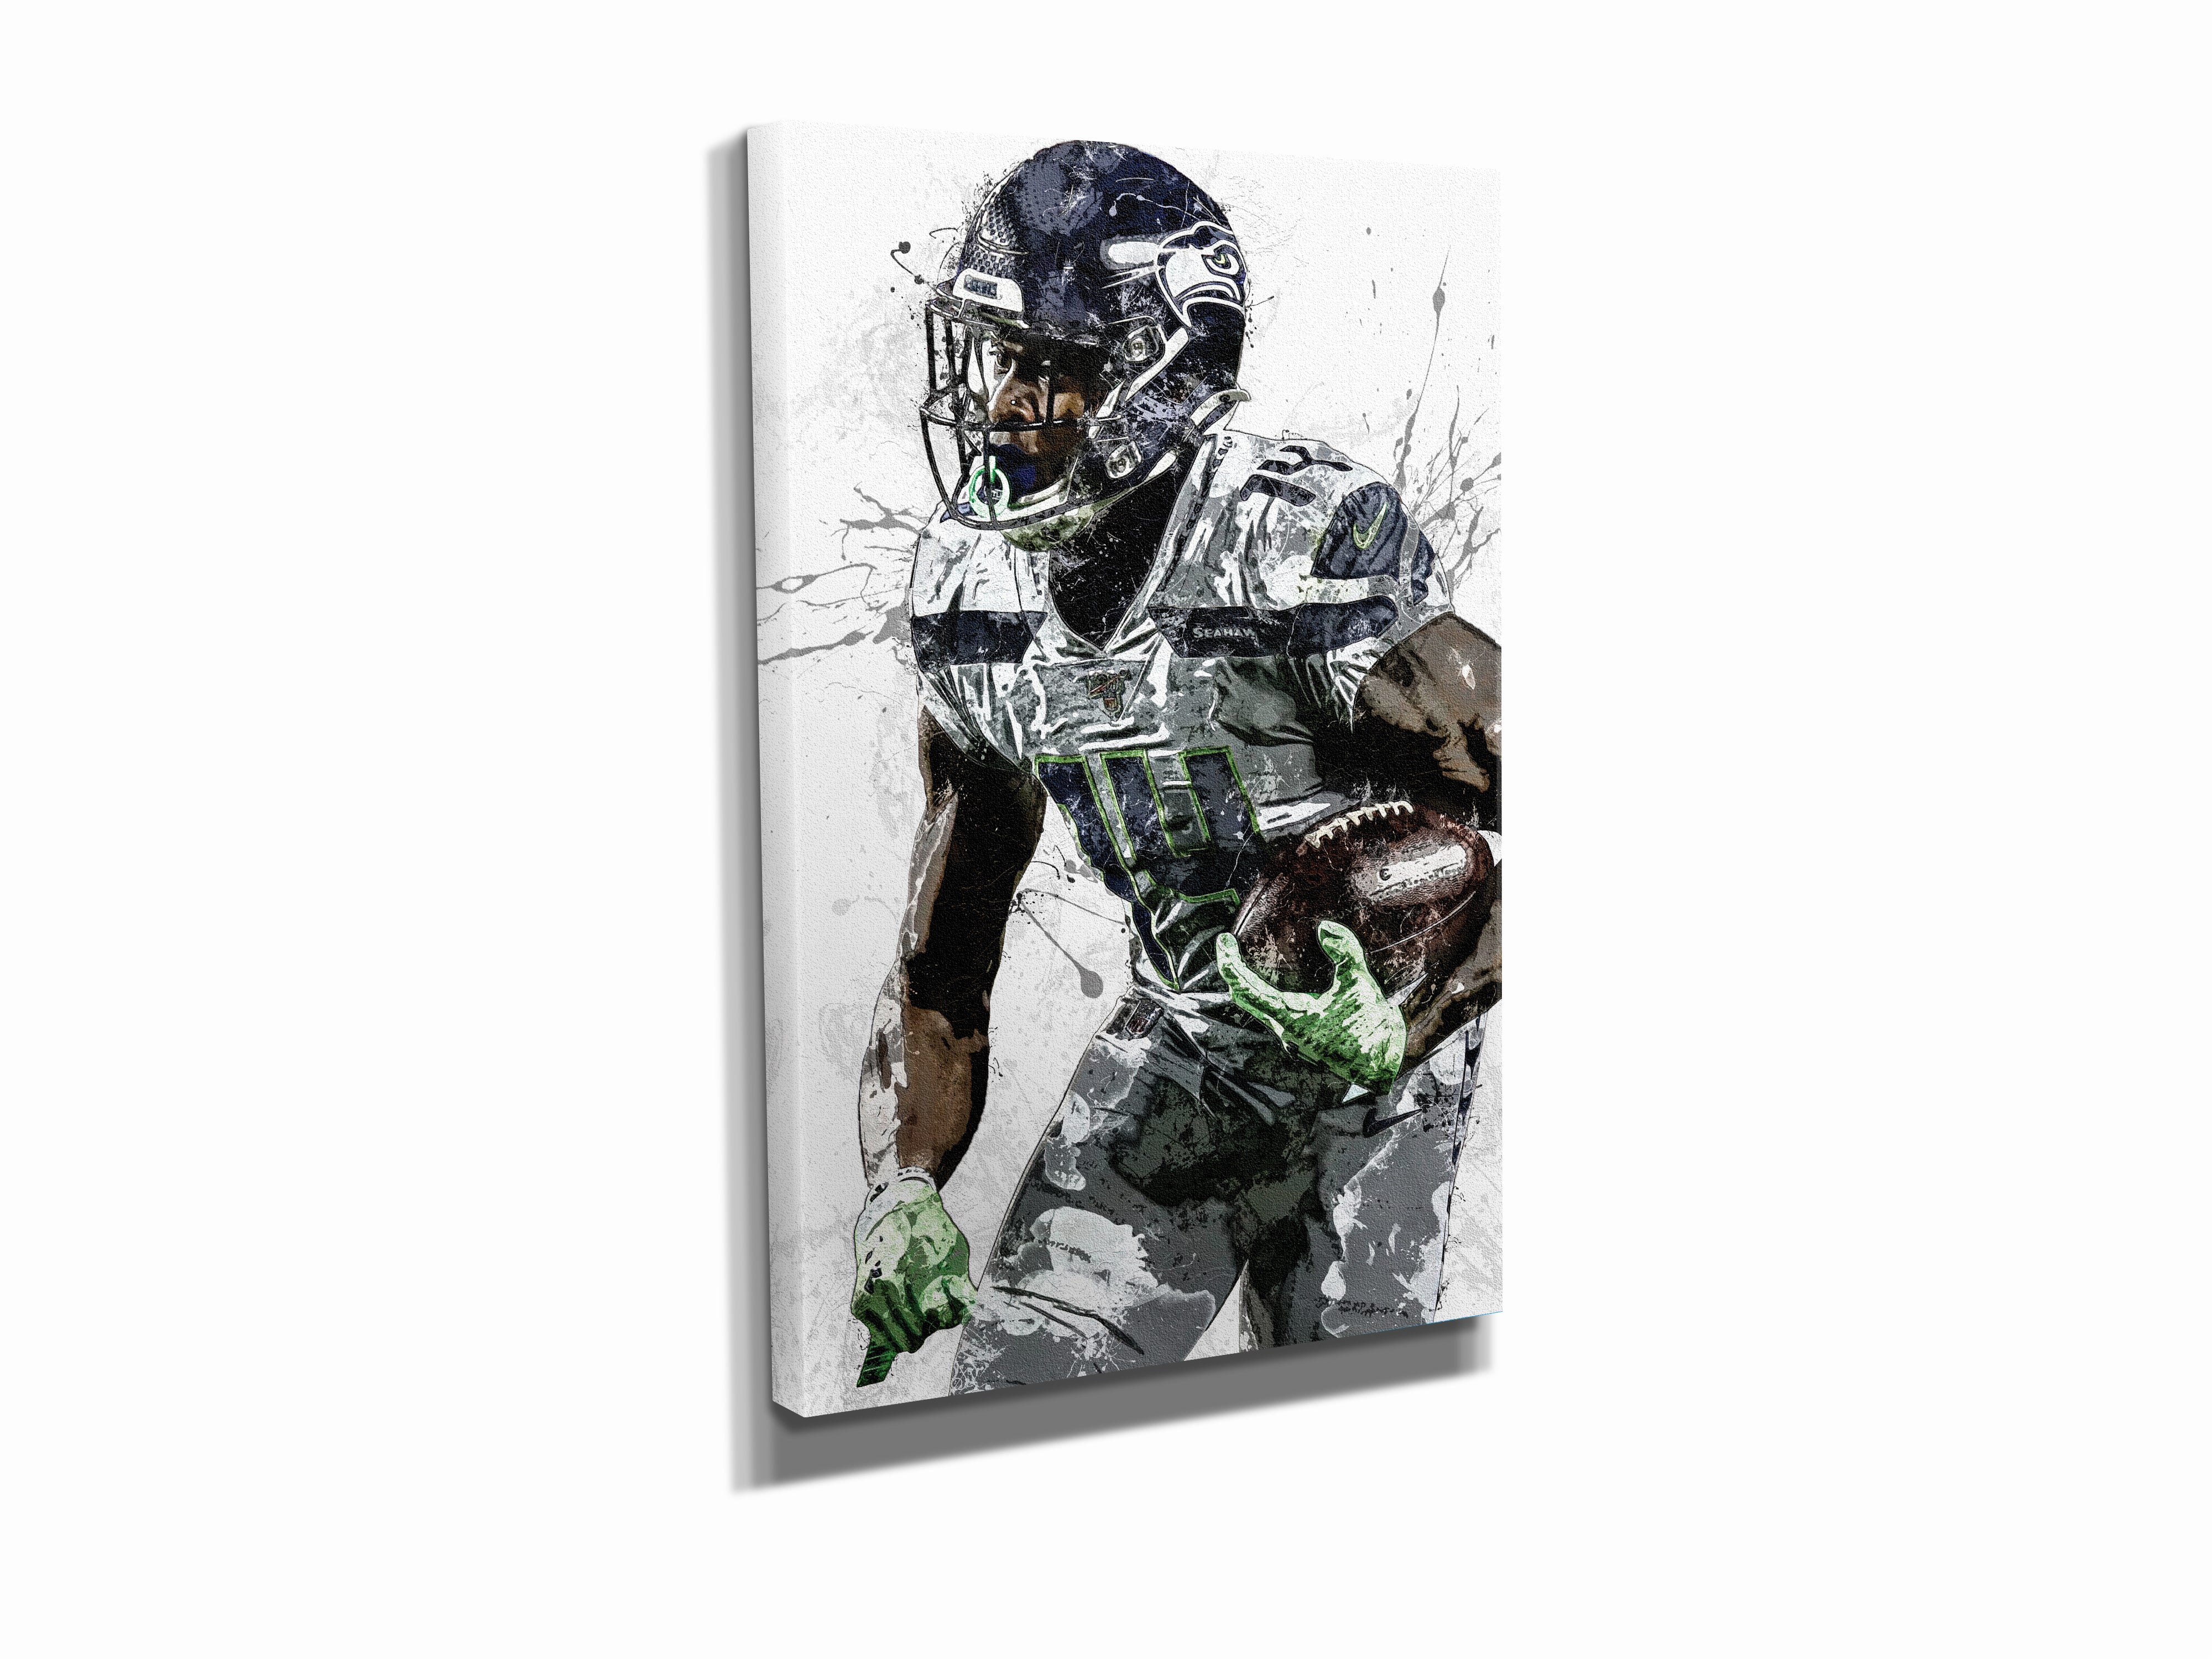 BAVIEN DK Metcalf Poster Football Art 8 Canvas Poster Wall Art Decor Print  Picture Paintings for Living Room Bedroom Decoration